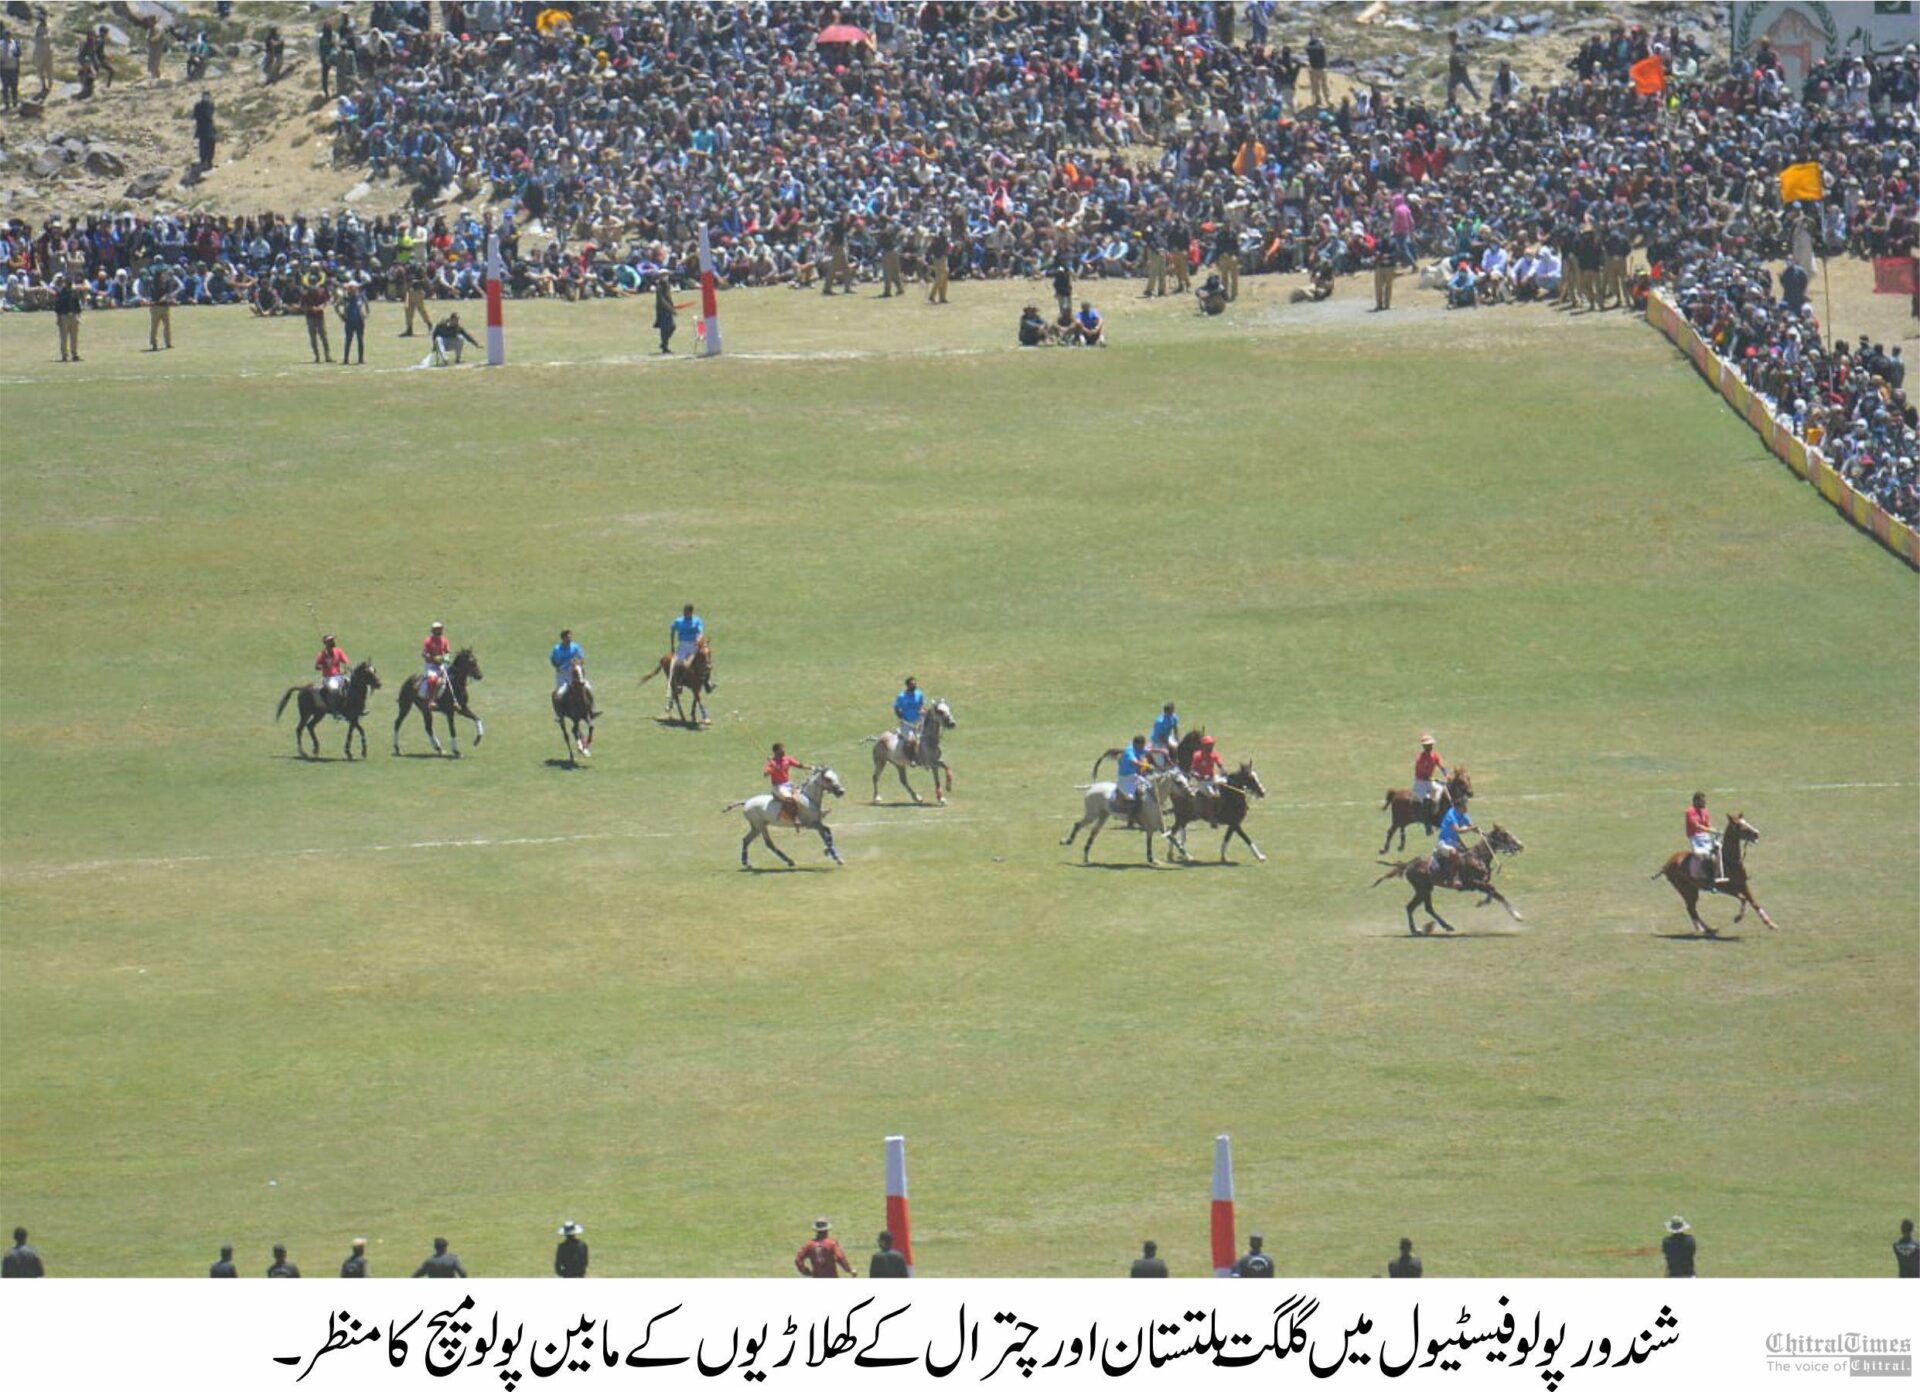 chitraltimes shandur festival concludes here in upper chitral 9